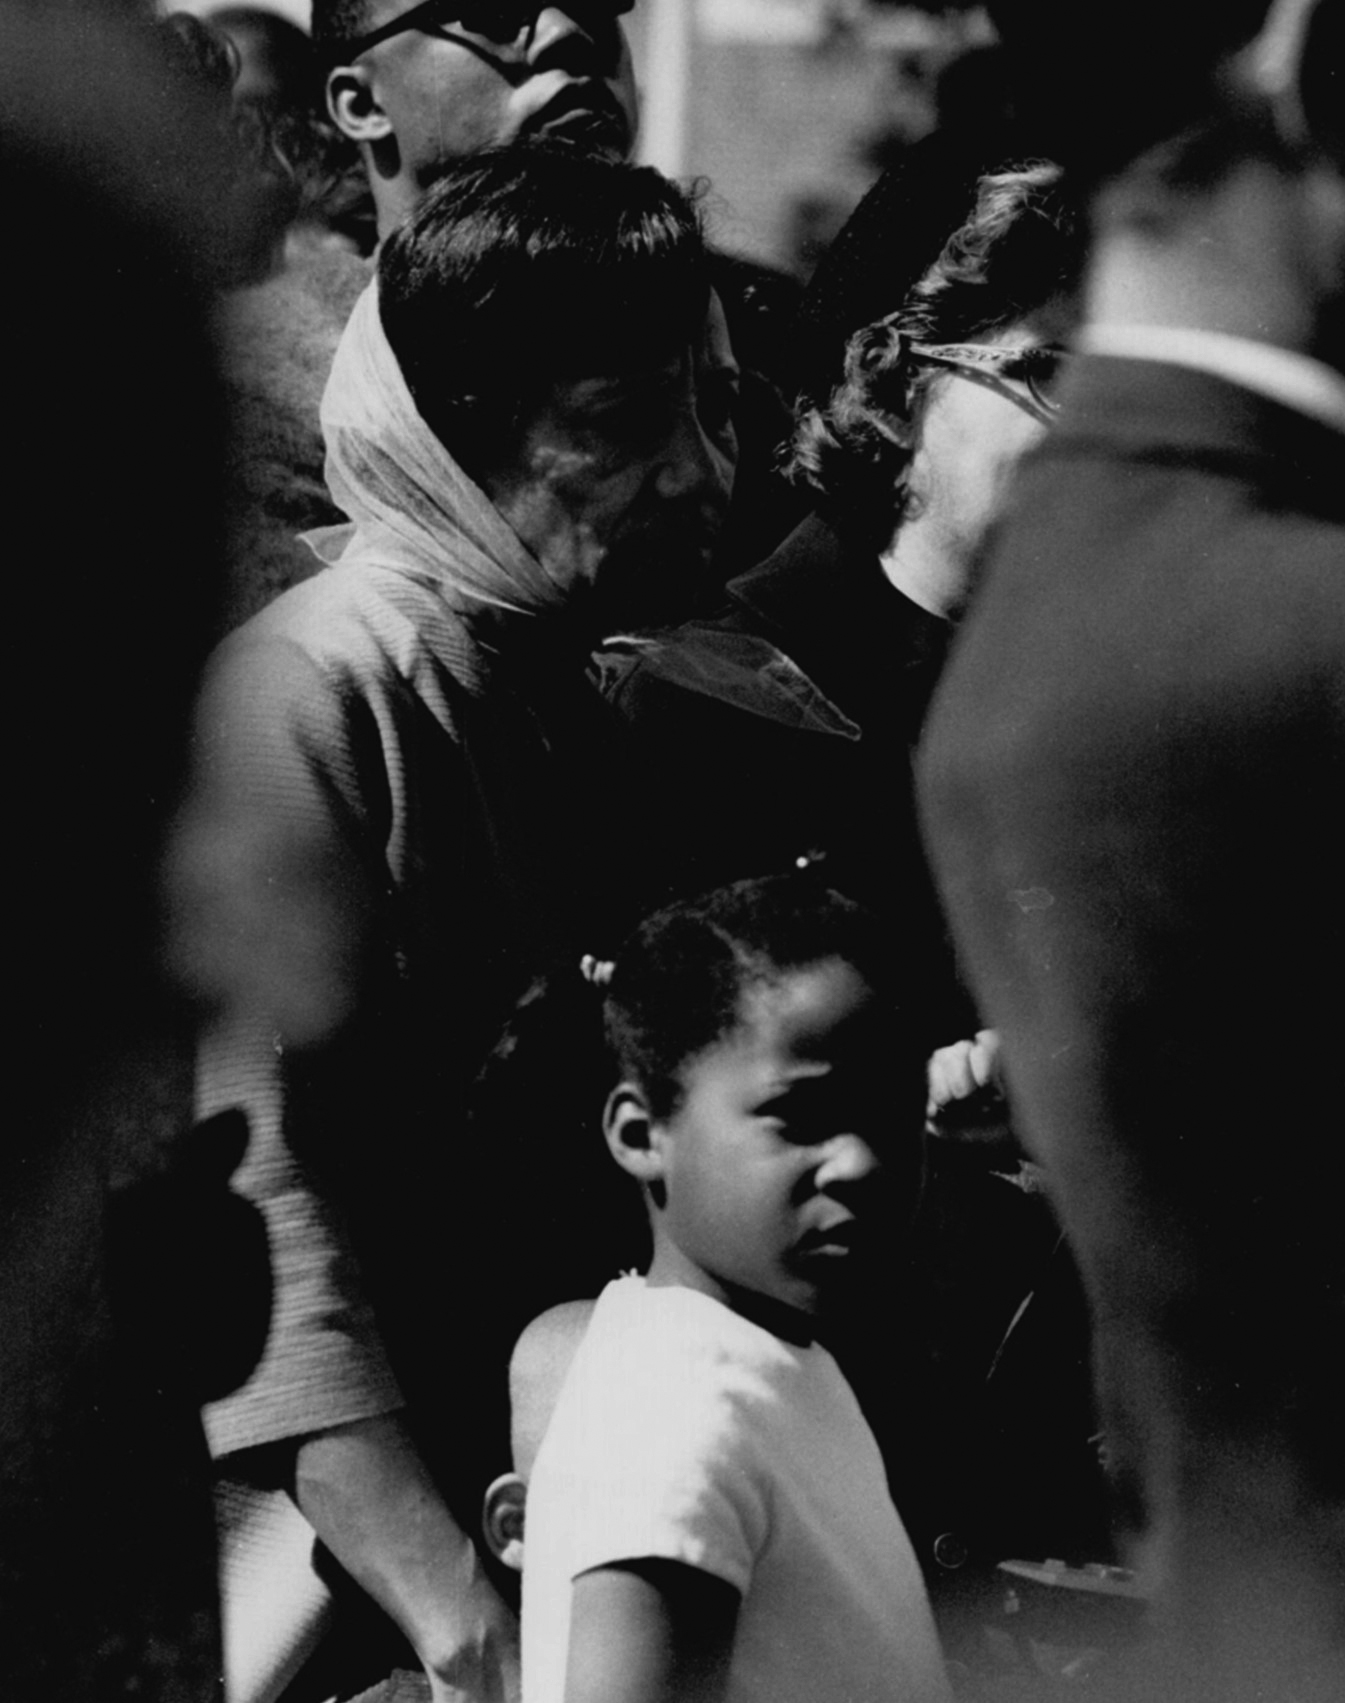 An older Black woman and a young Black child in a crowd of people. 